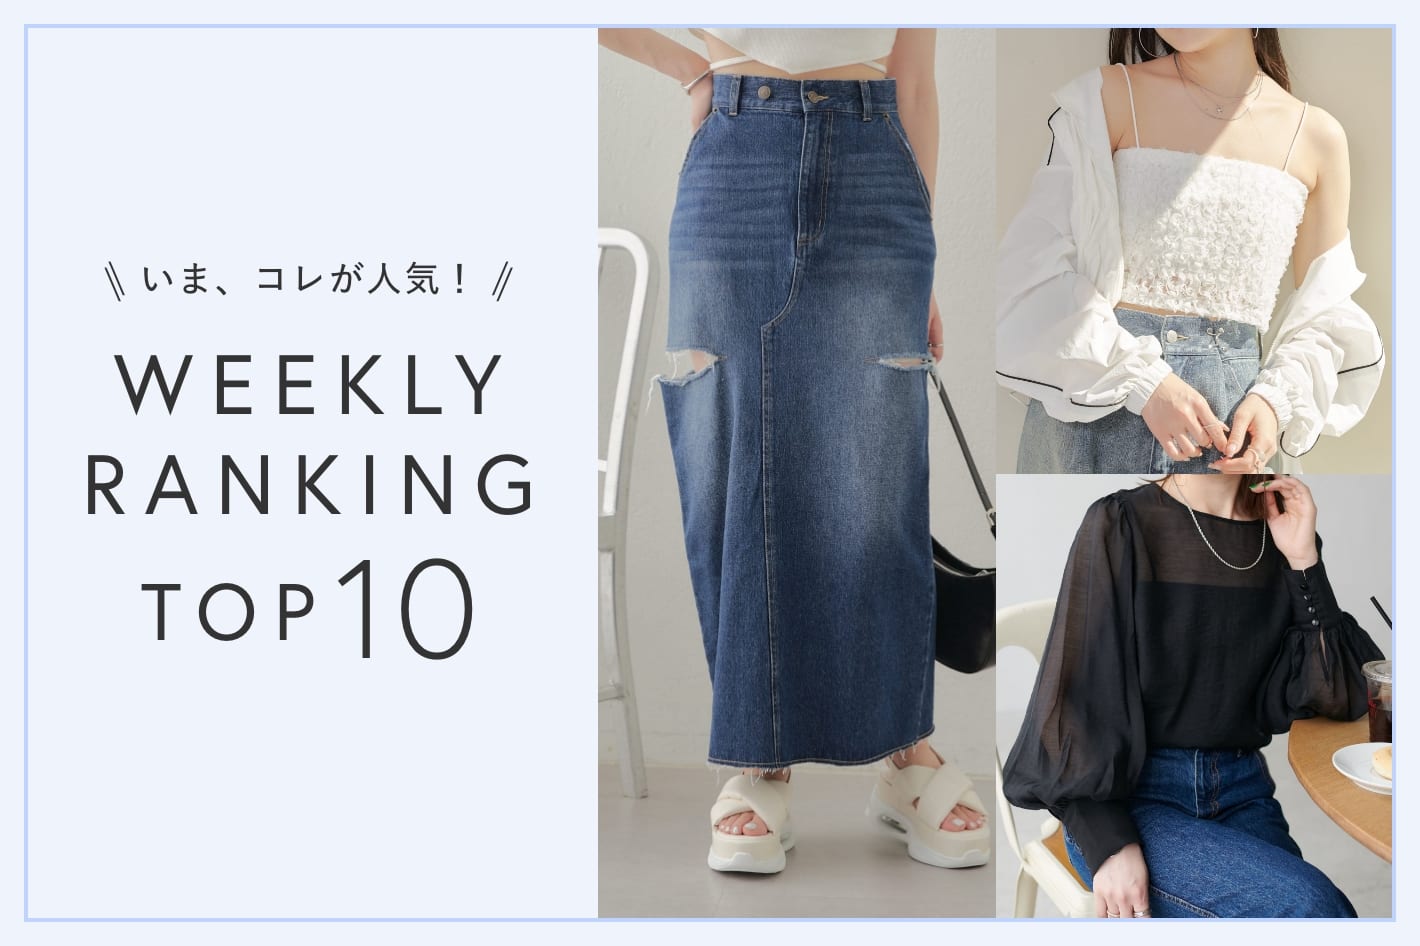 OUTLET いま、これが人気！WEEKLY RANKING TOP10！【6/11更新】